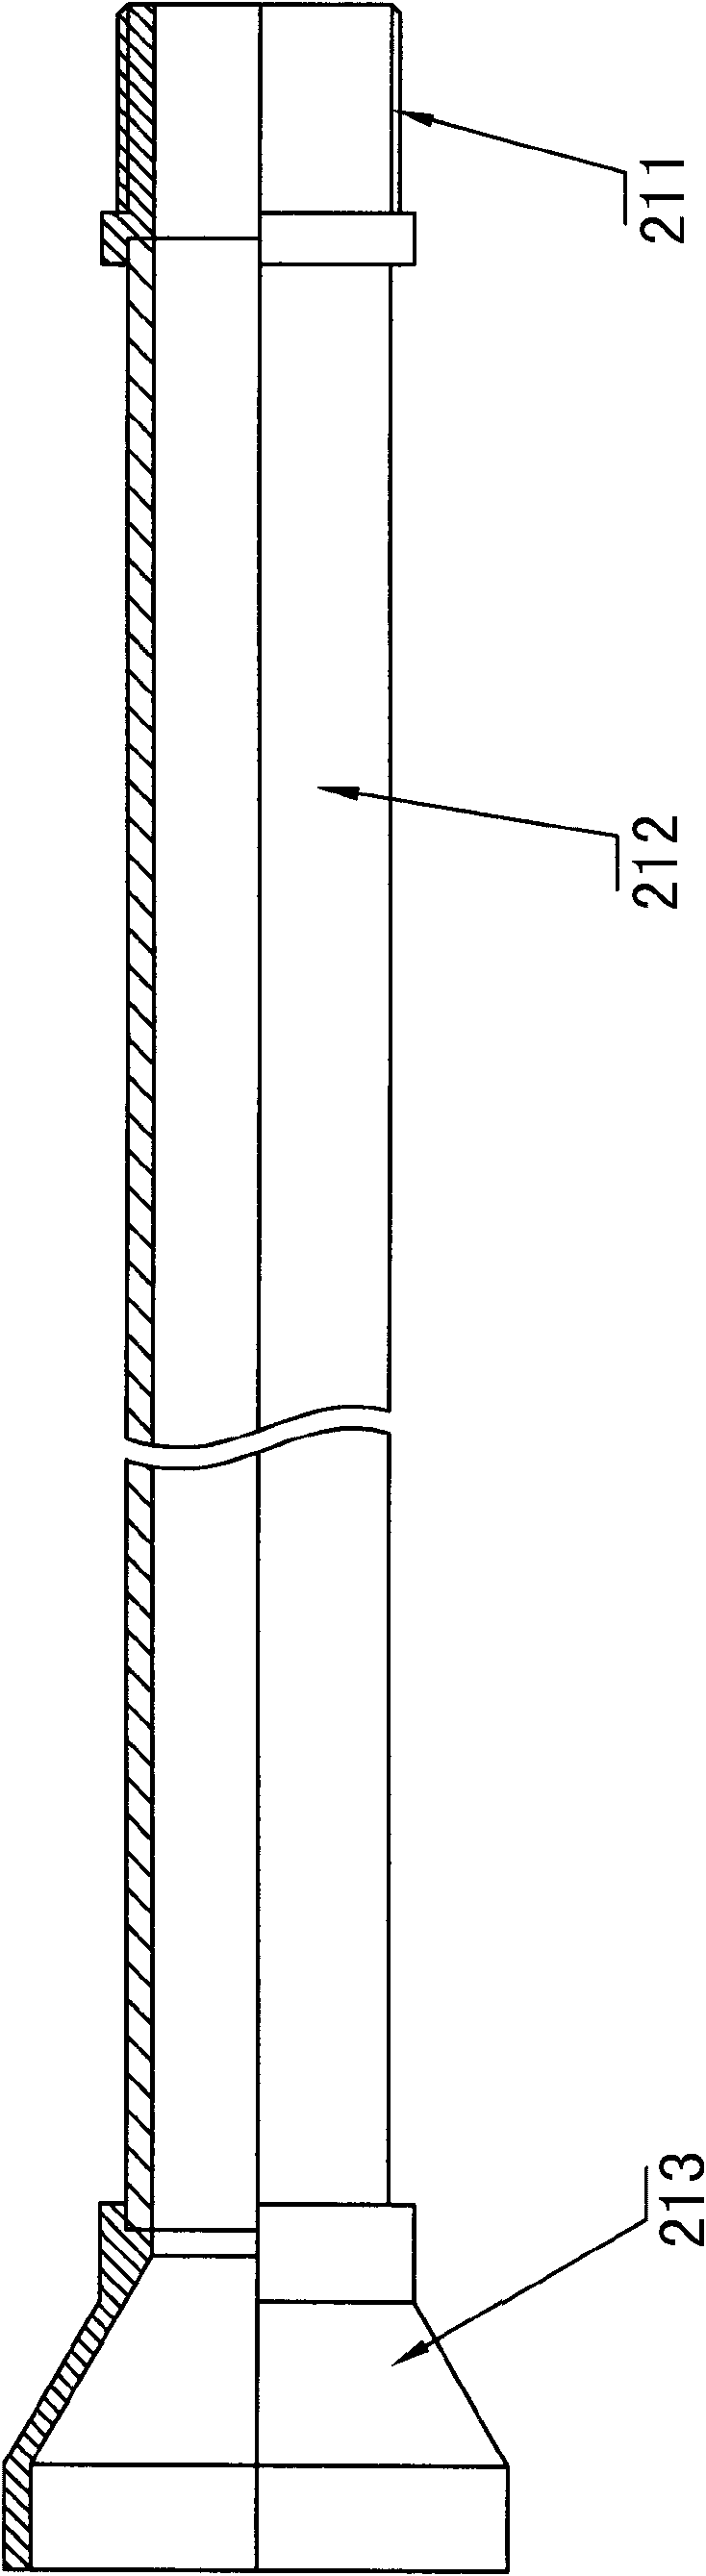 Mobile waste lamp tube safety recycling processing method and device thereof